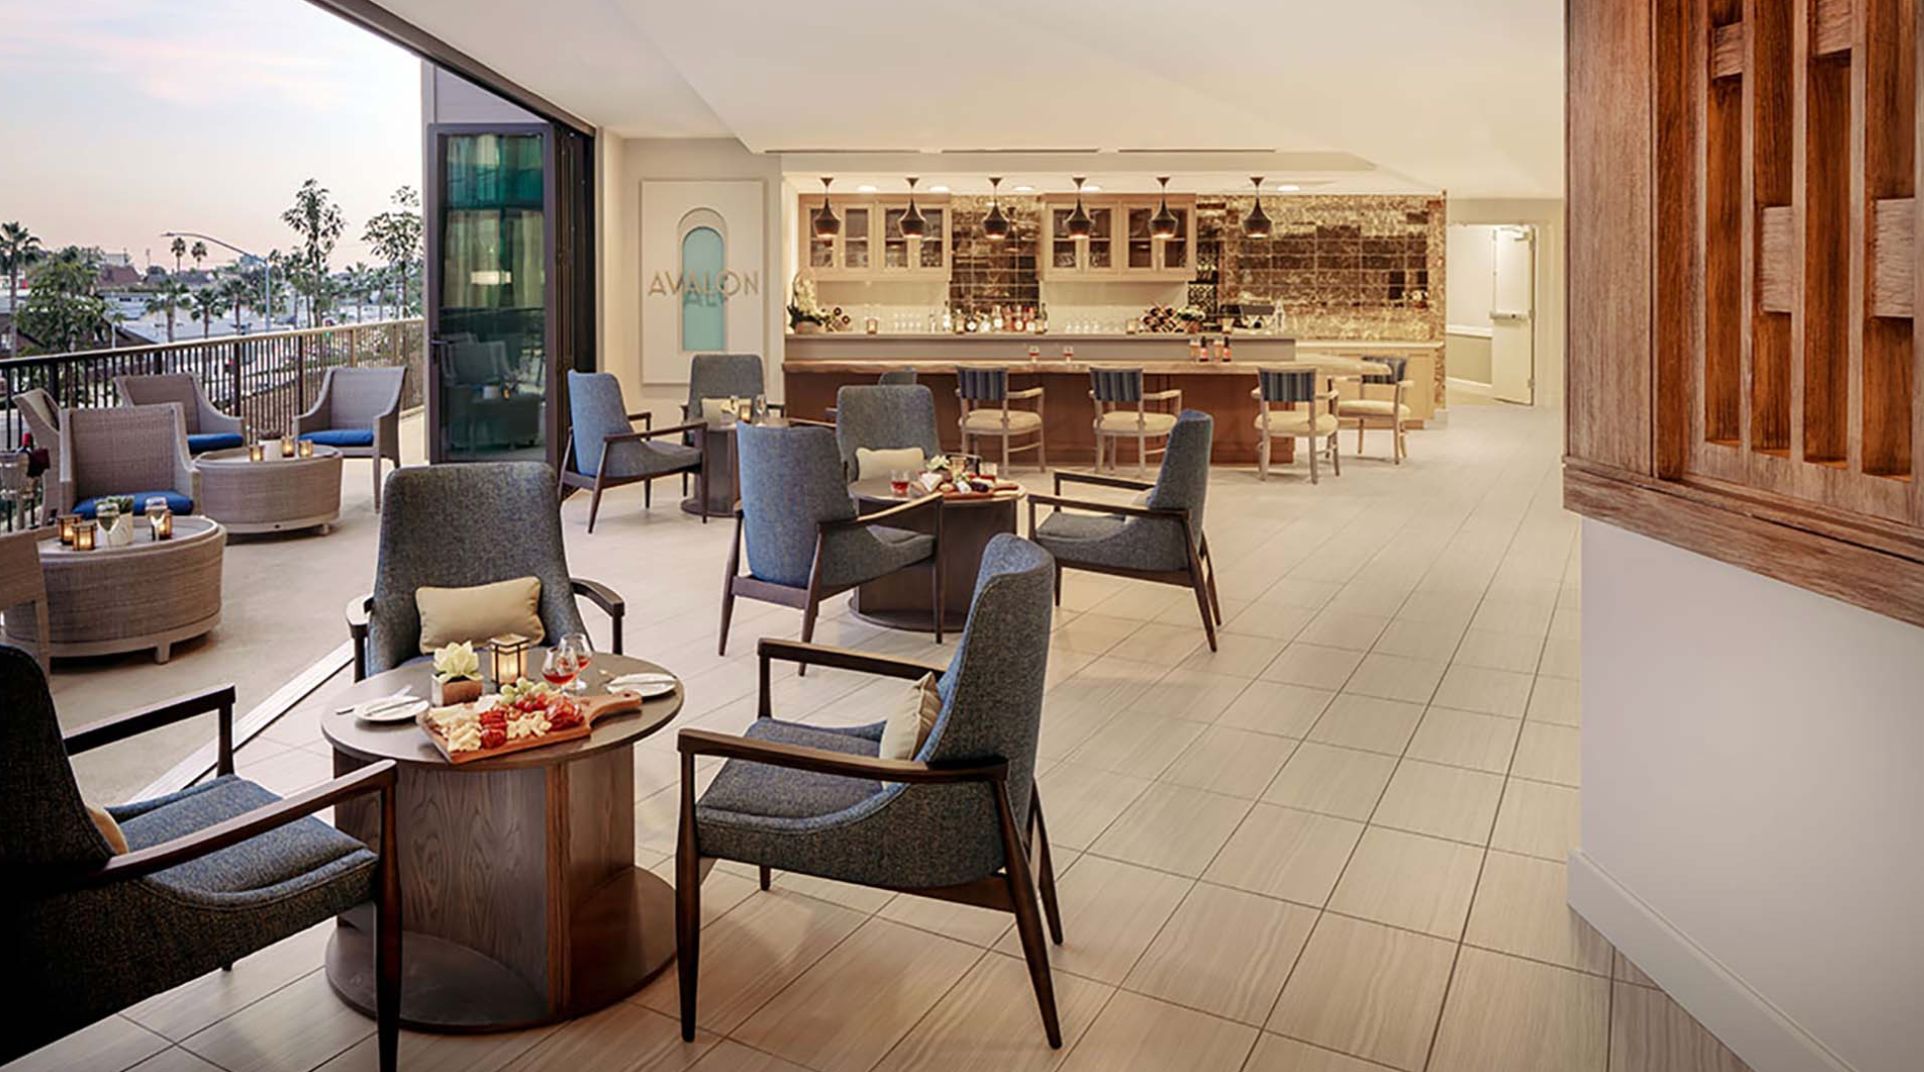 Interior view of Atria Newport Beach senior living community featuring dining room and lounge.